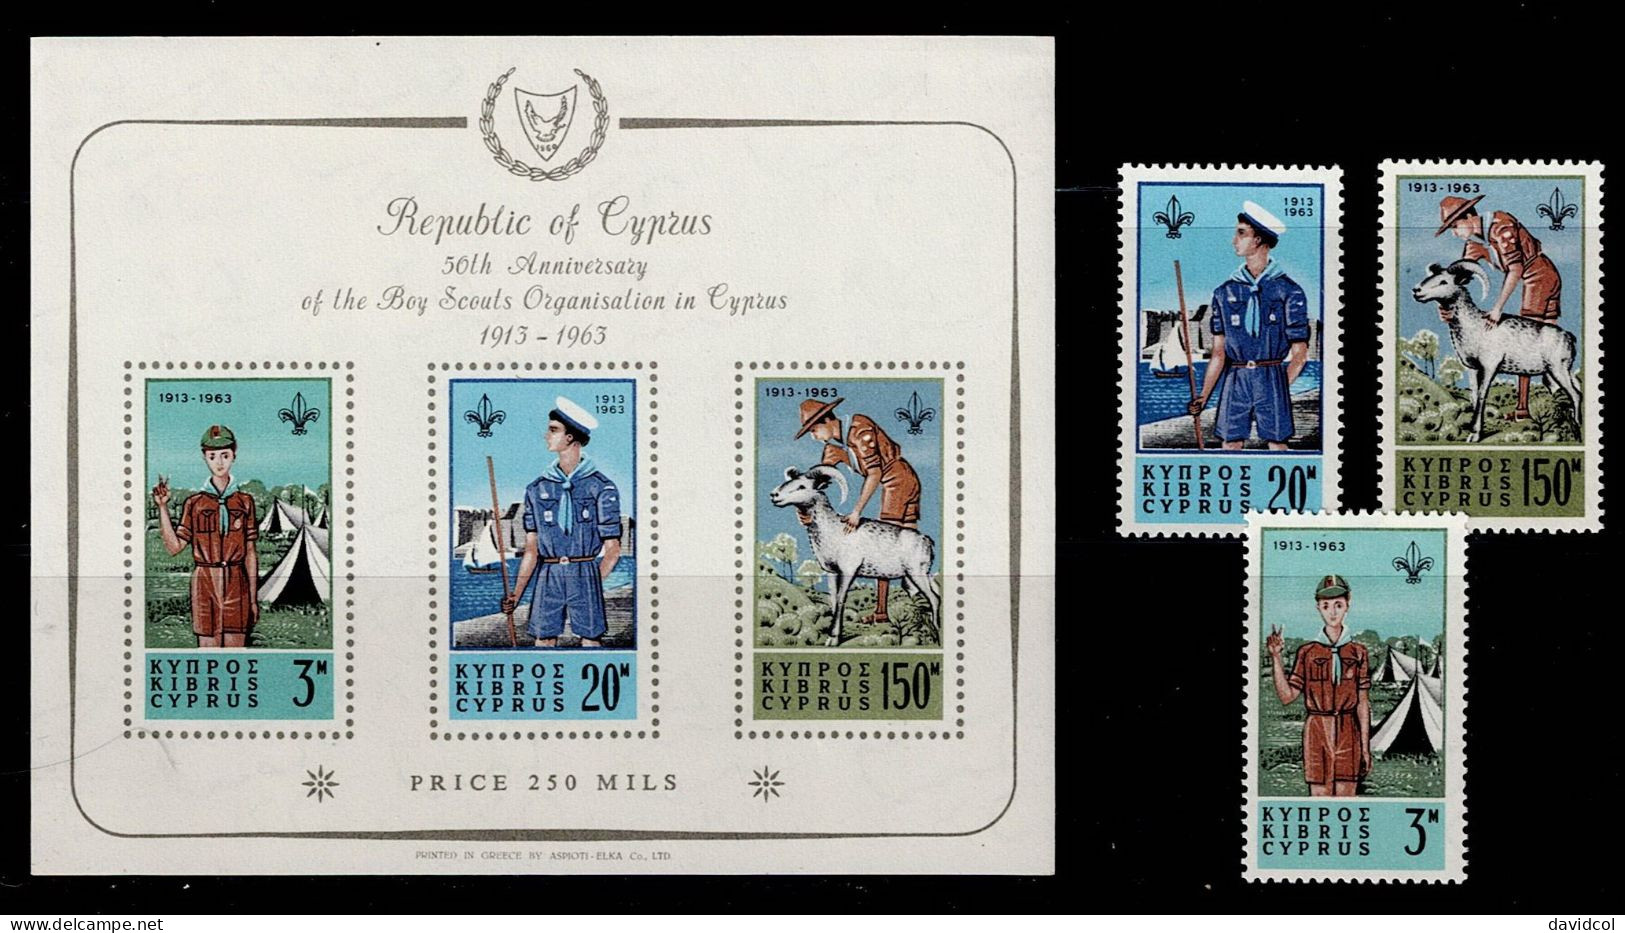 CHP-02- CYPRUS - 1963 - MNH -SCOUTS- 50TH ANNIVERSARY BOY SCOUTS OF CYPRUS - Nuovi